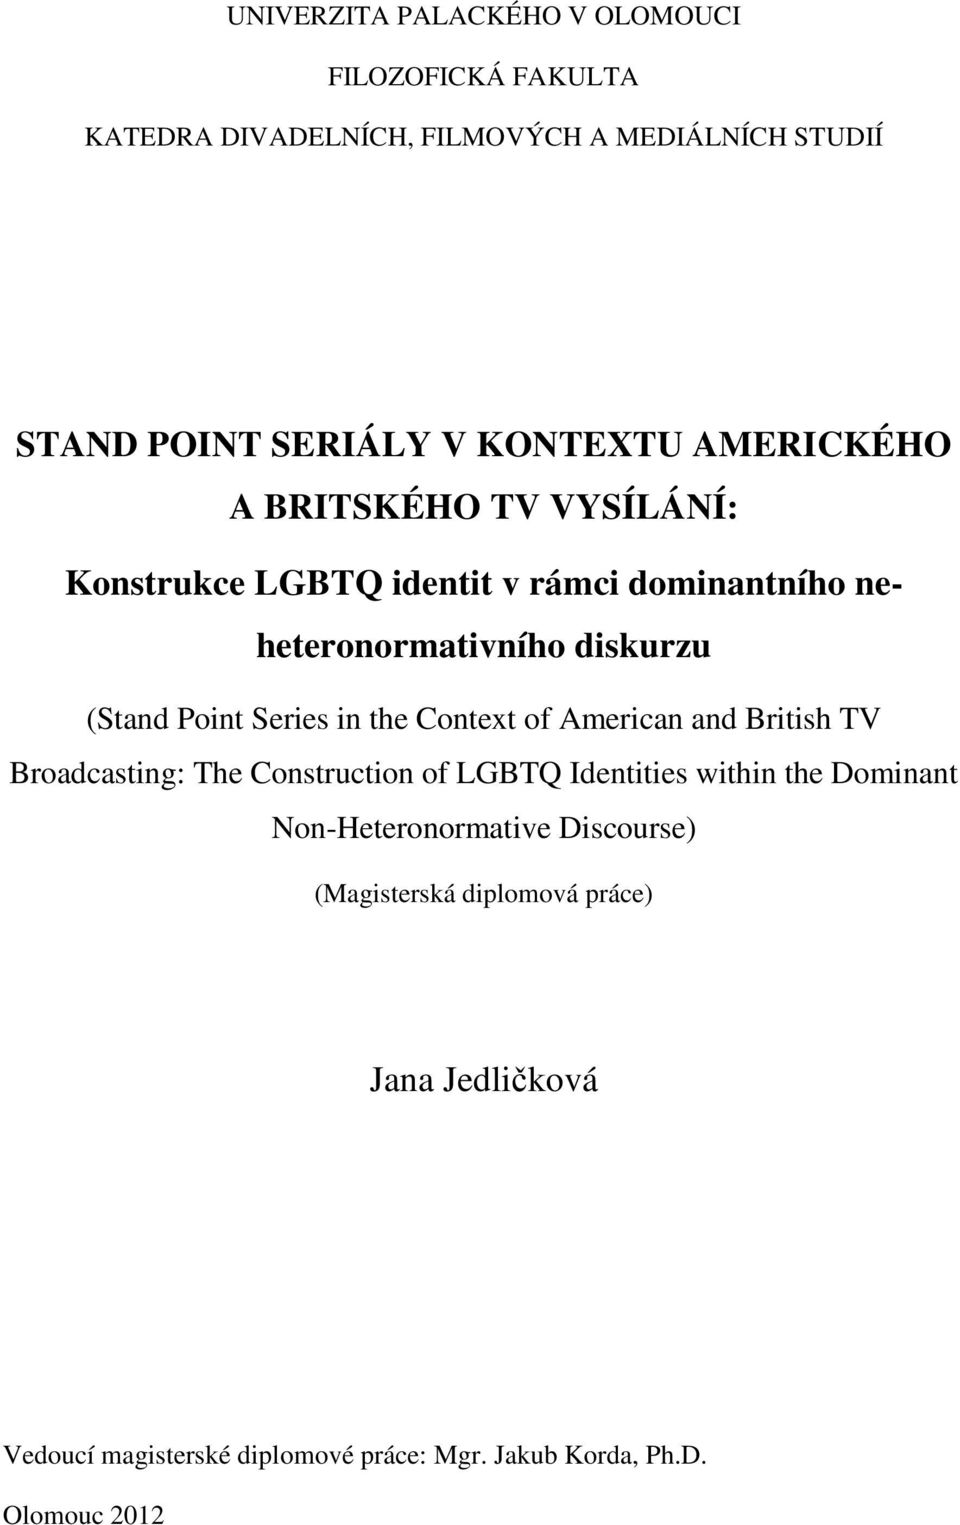 Point Series in the Context of American and British TV Broadcasting: The Construction of LGBTQ Identities within the Dominant